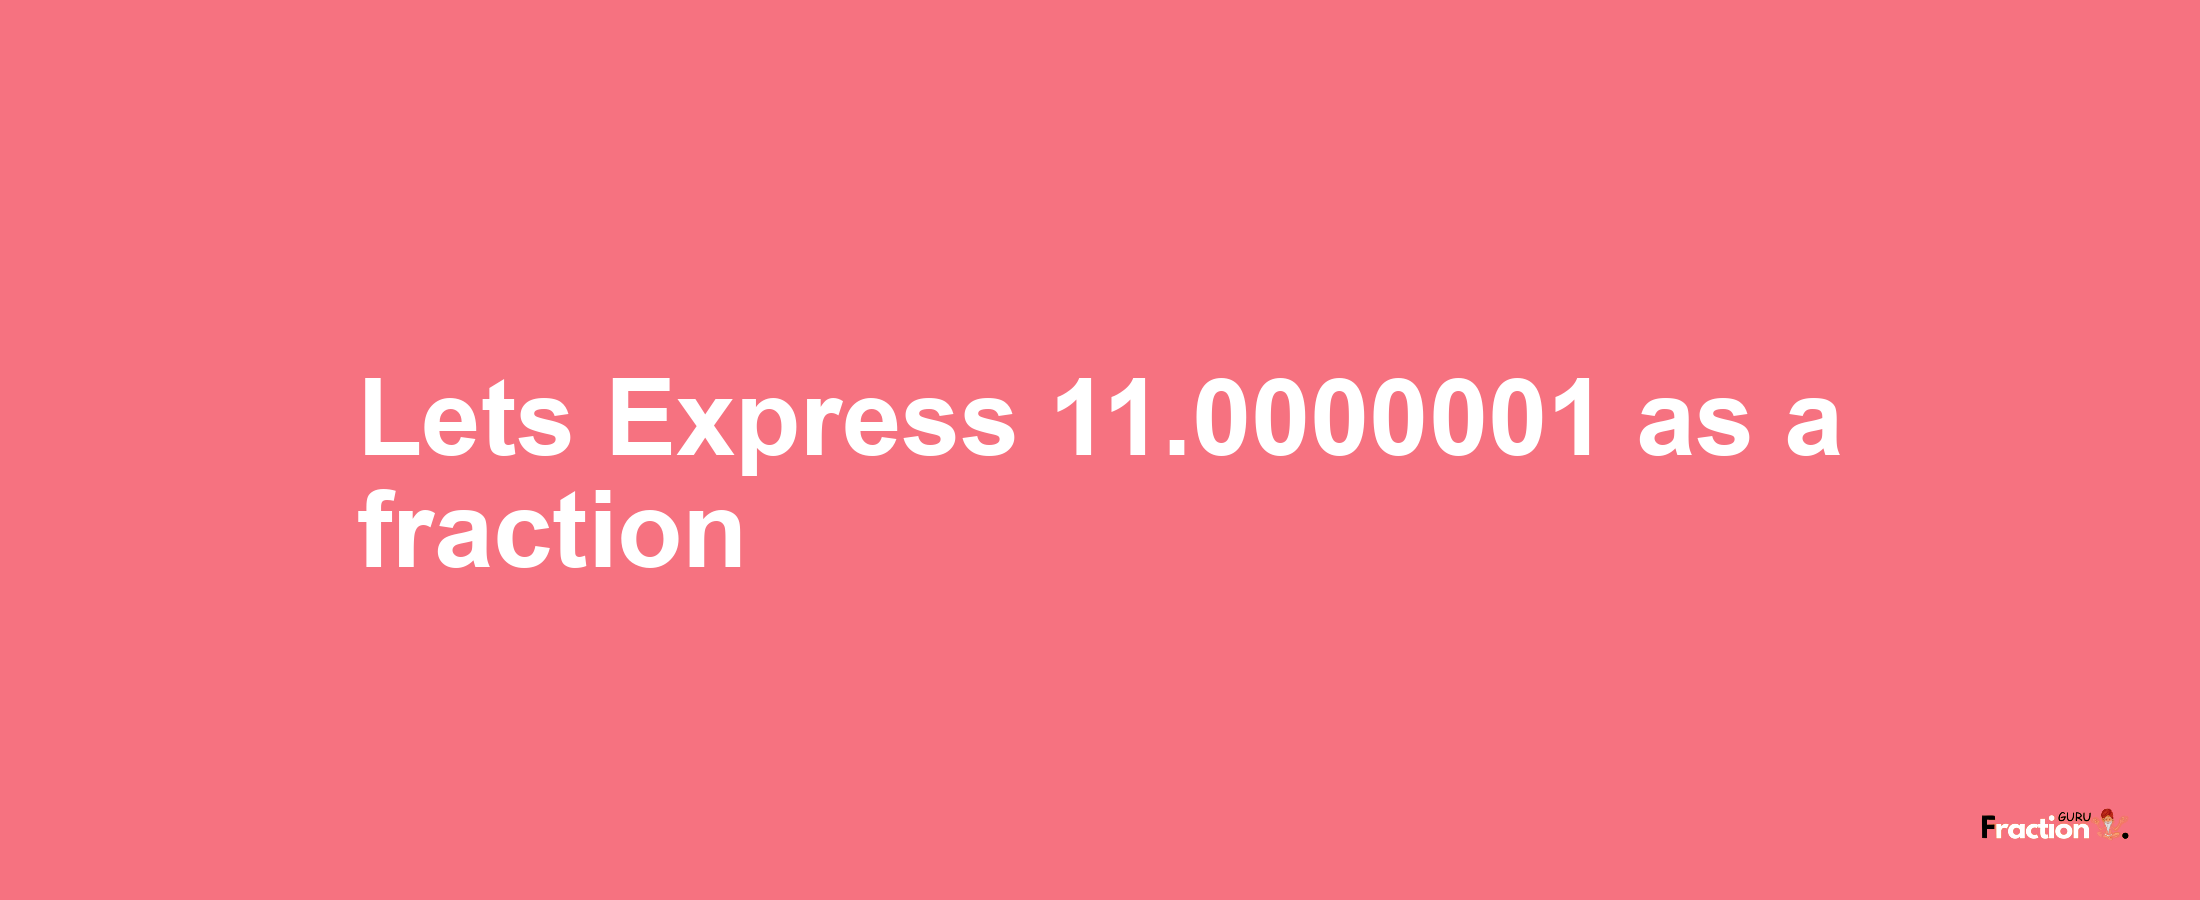 Lets Express 11.0000001 as afraction